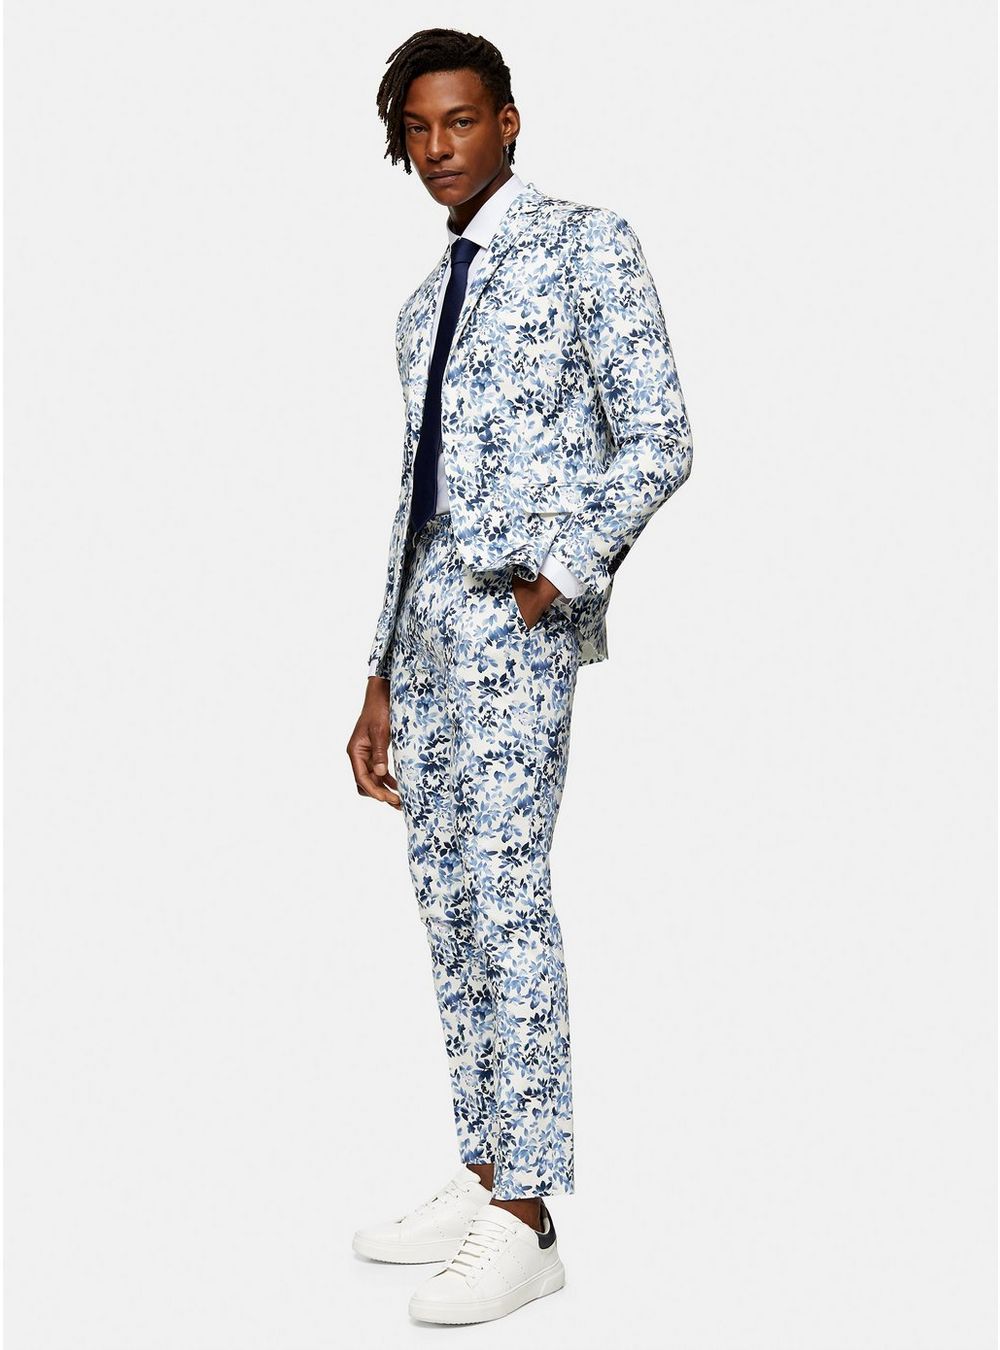 white prom suits 2019